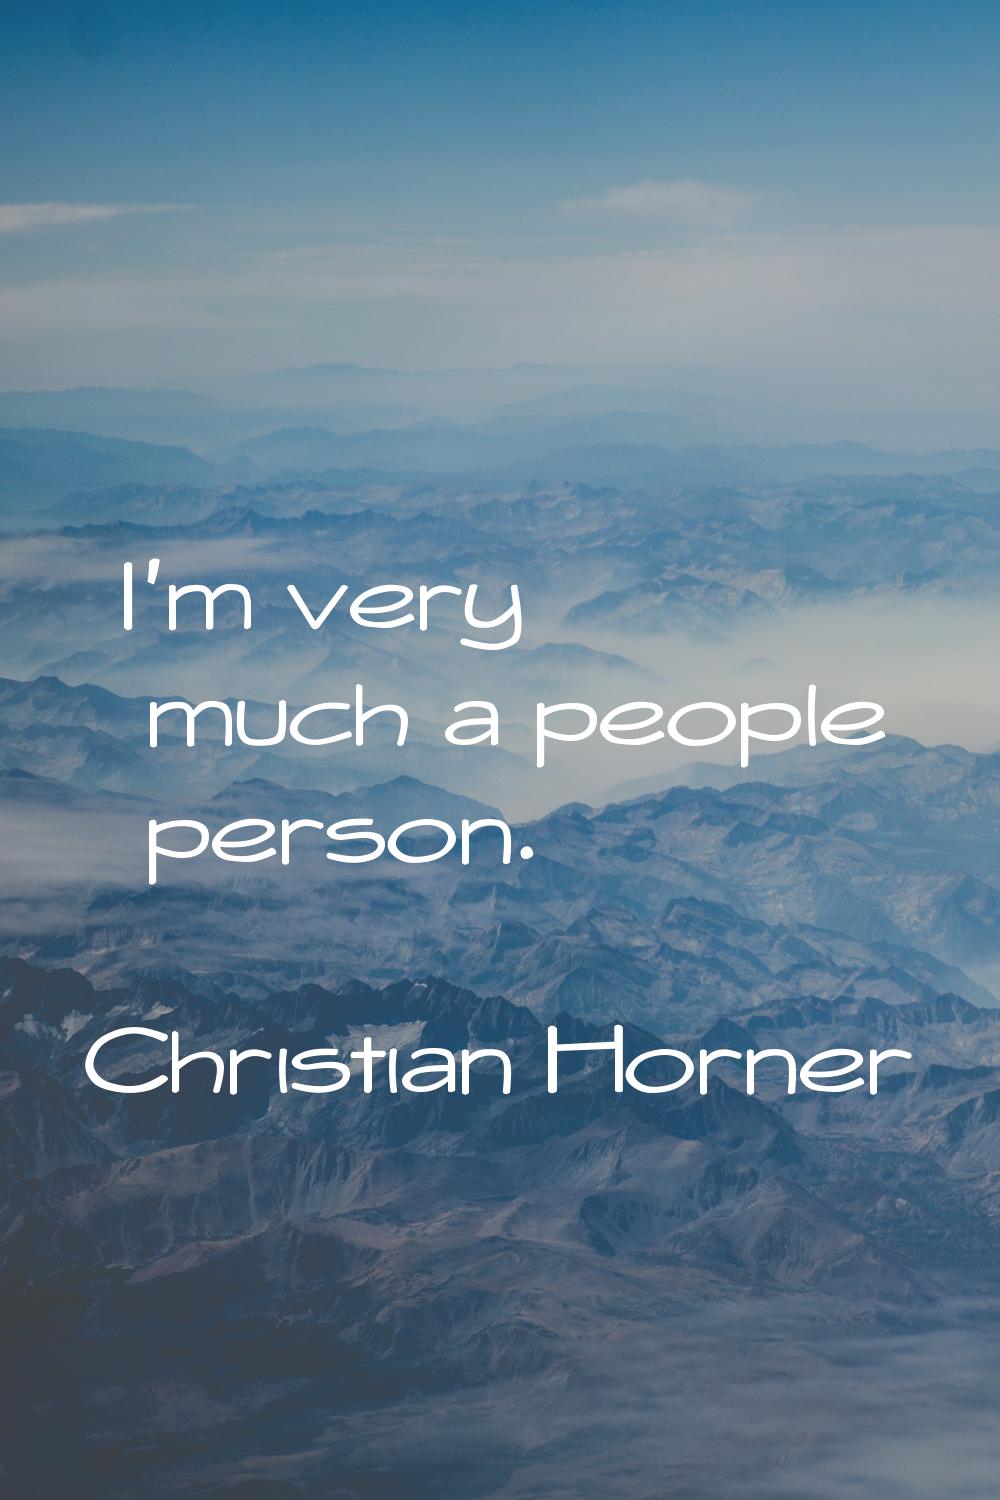 I'm very much a people person.